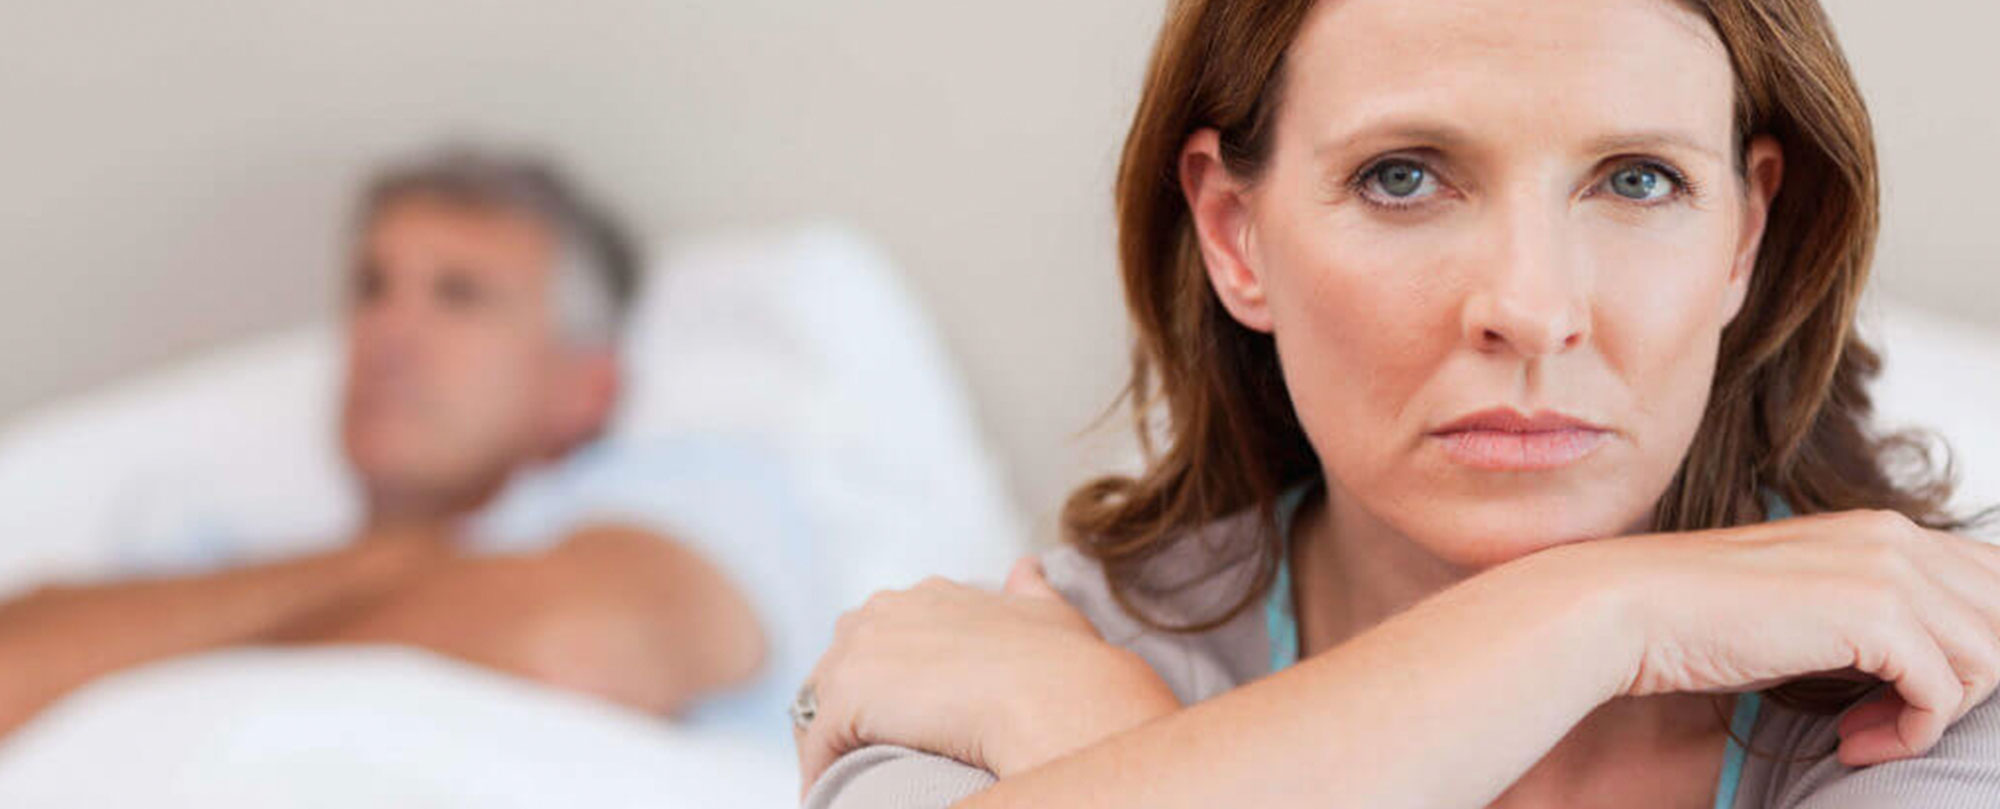 adult woman looking concerned with faded image of older man in bed